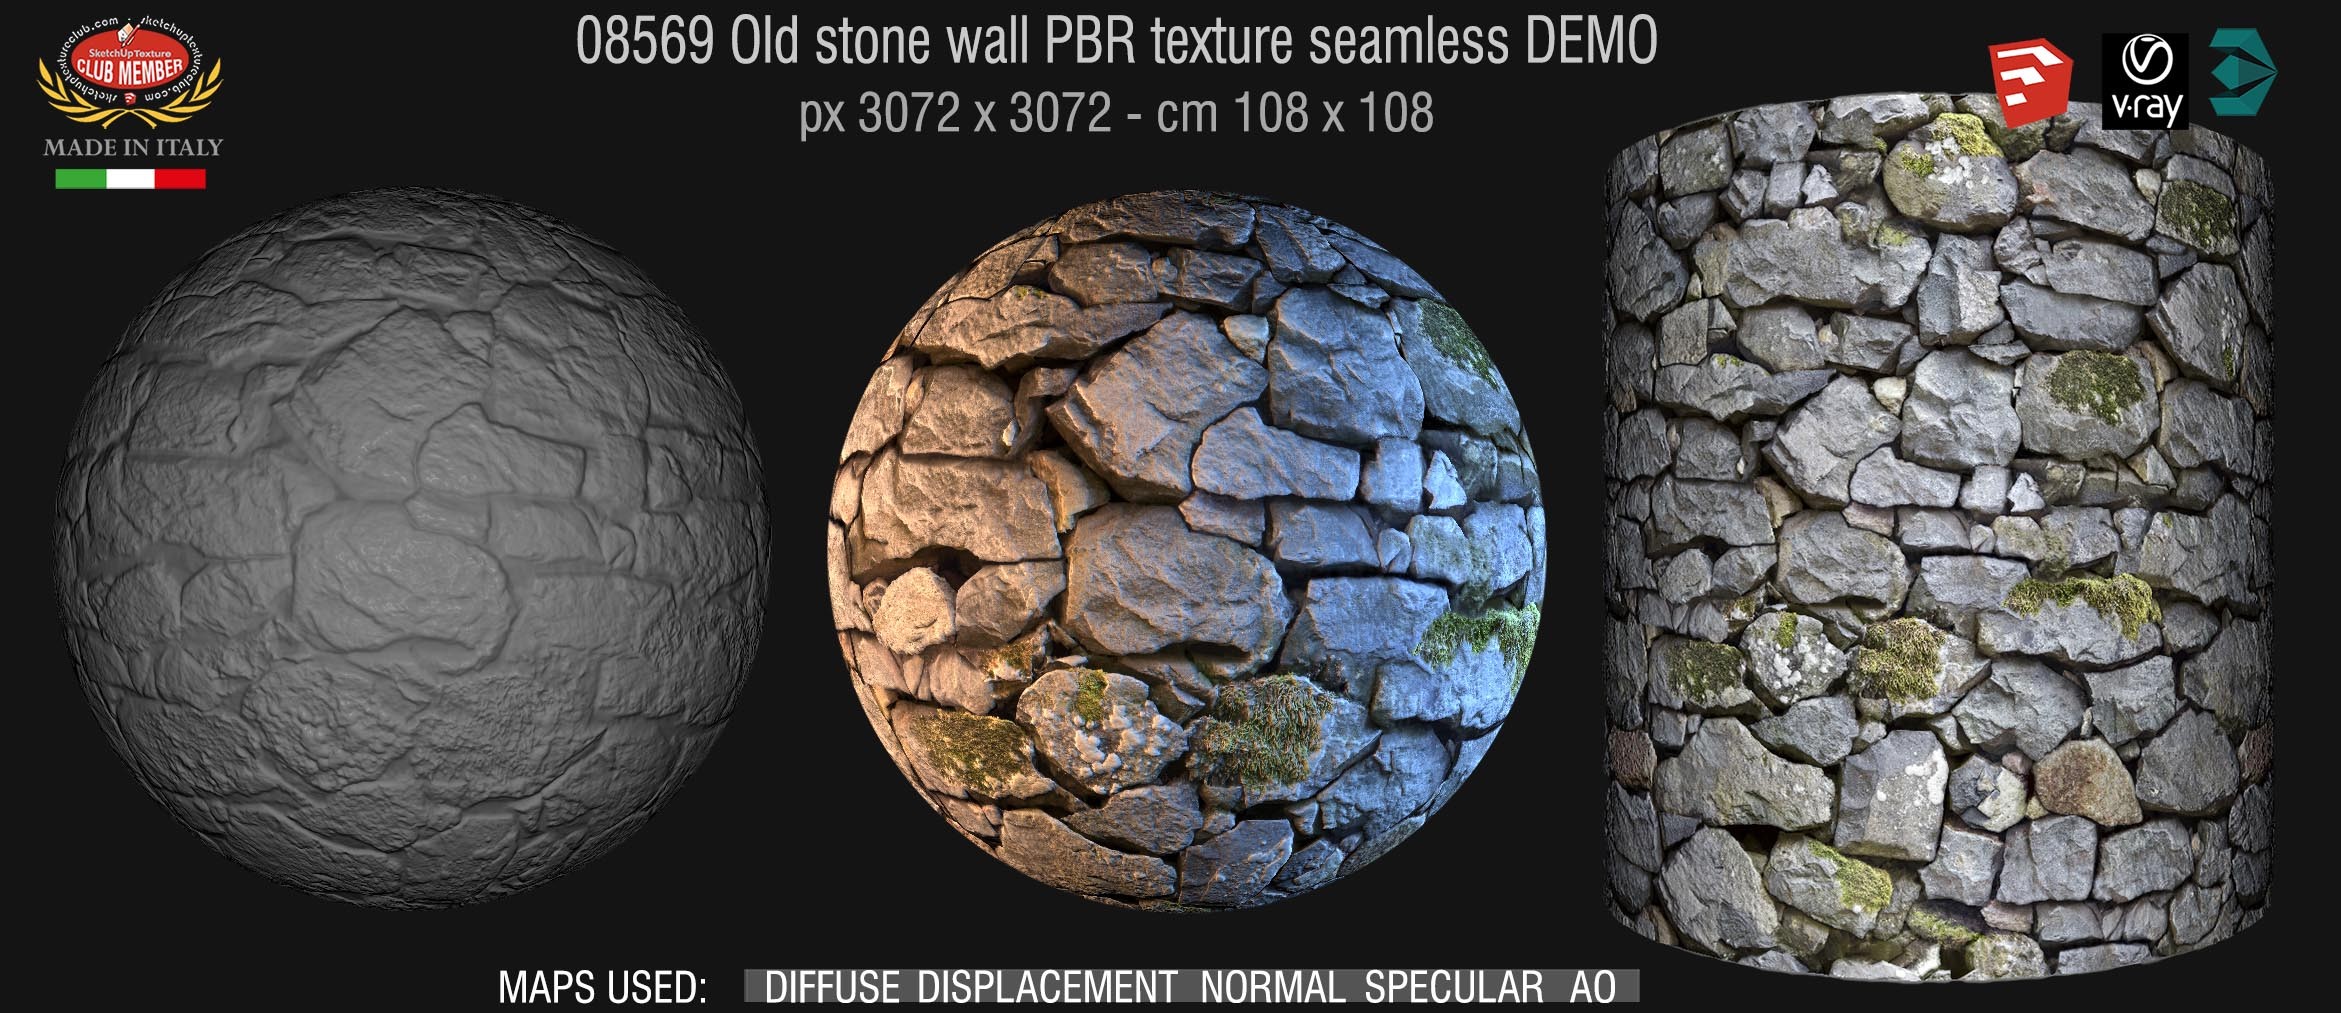 08569 Old stone wall PBR texture seamless DEMO